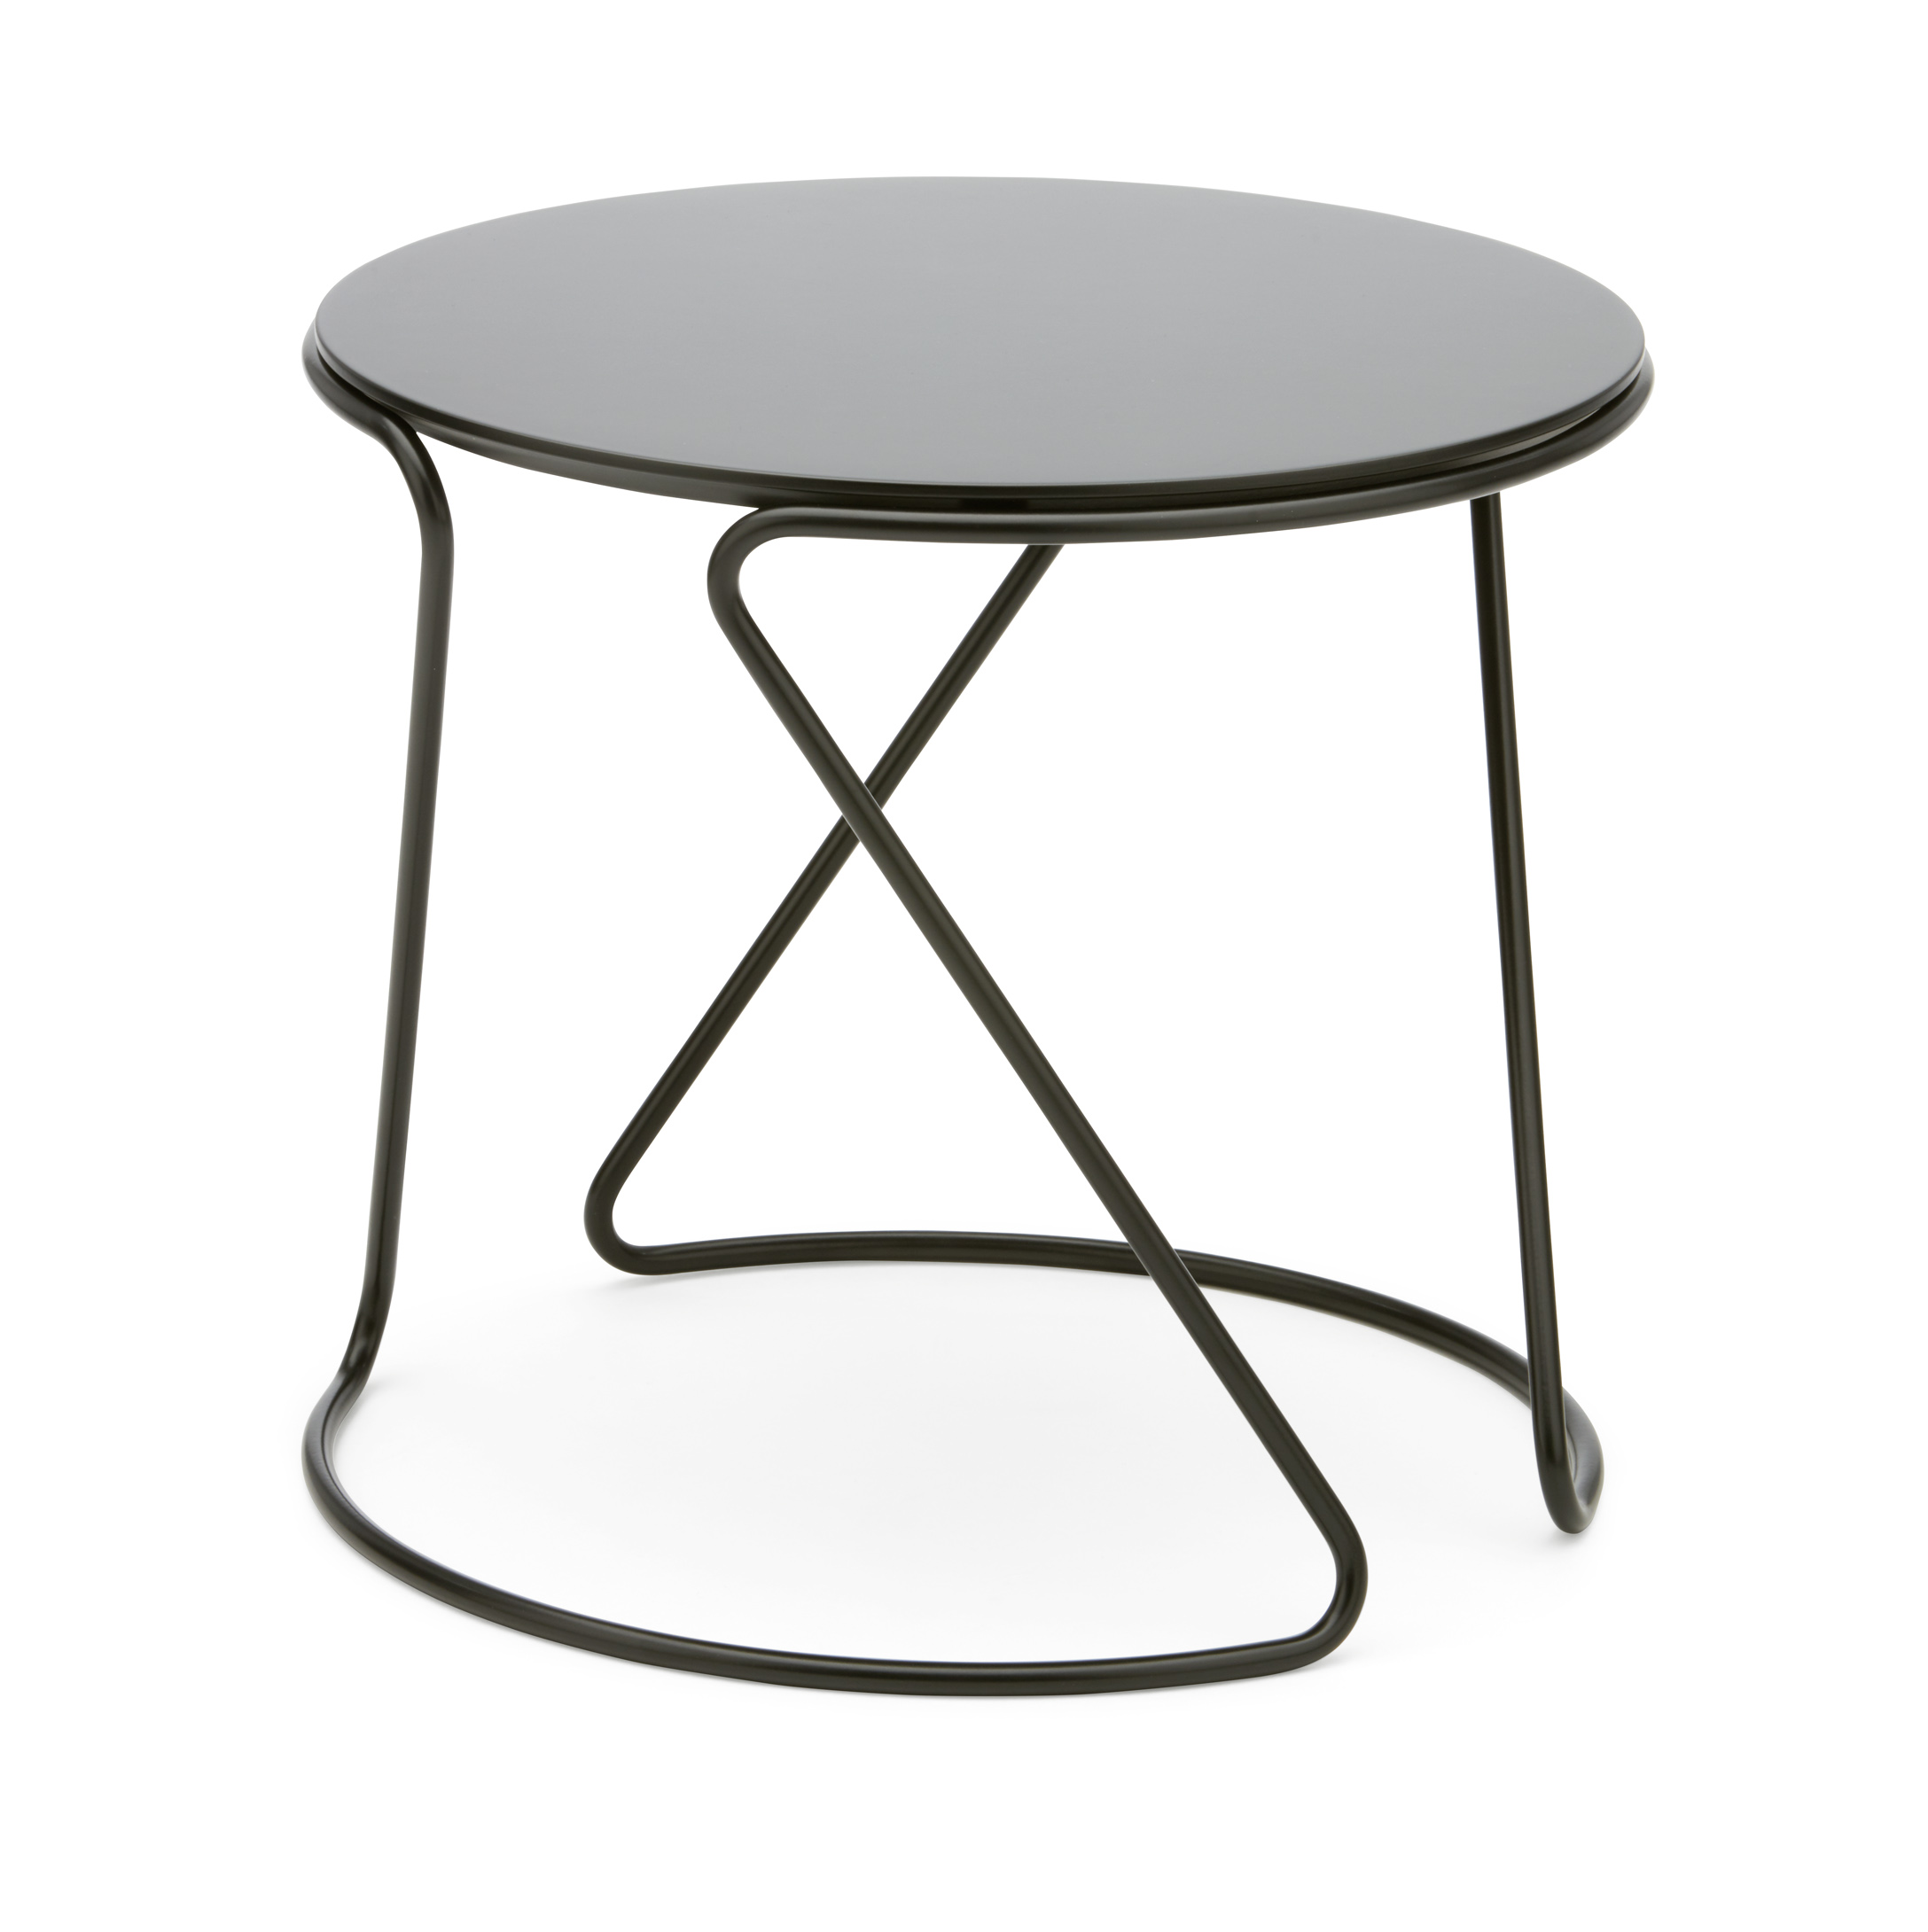 S 18 Side Table by Uli Budde for Thonet